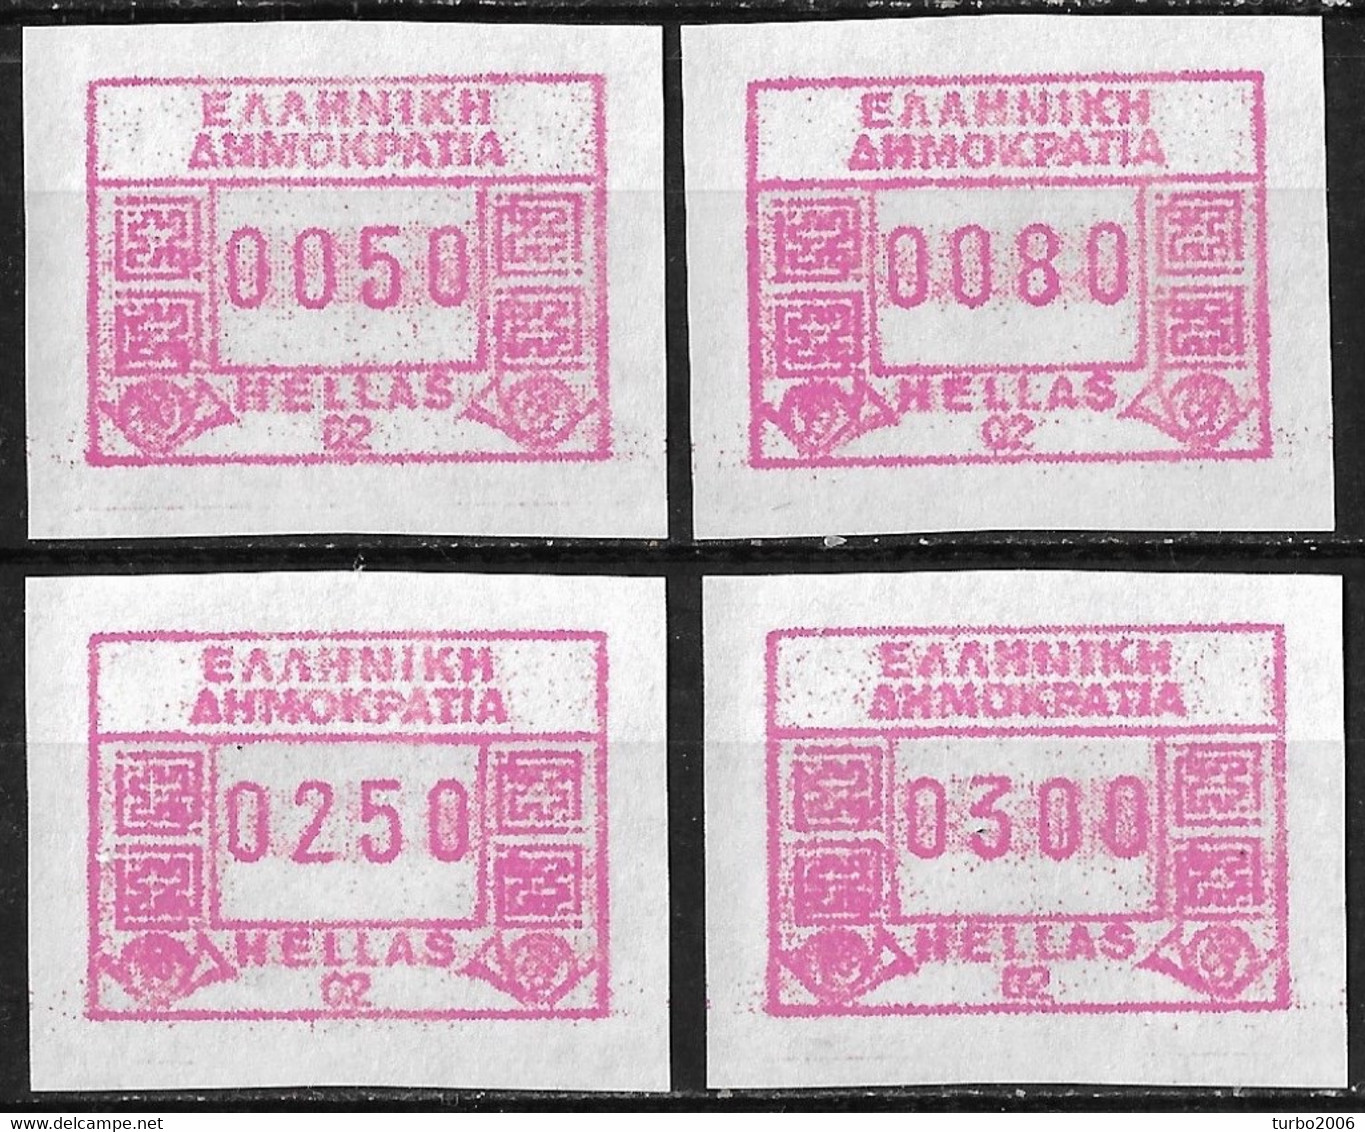 GREECE 1991 FRAMA Stamps 02 Athens East (international) Airport Set Of 50-80-250-300 D MNH Hellas M 19 - Machine Labels [ATM]